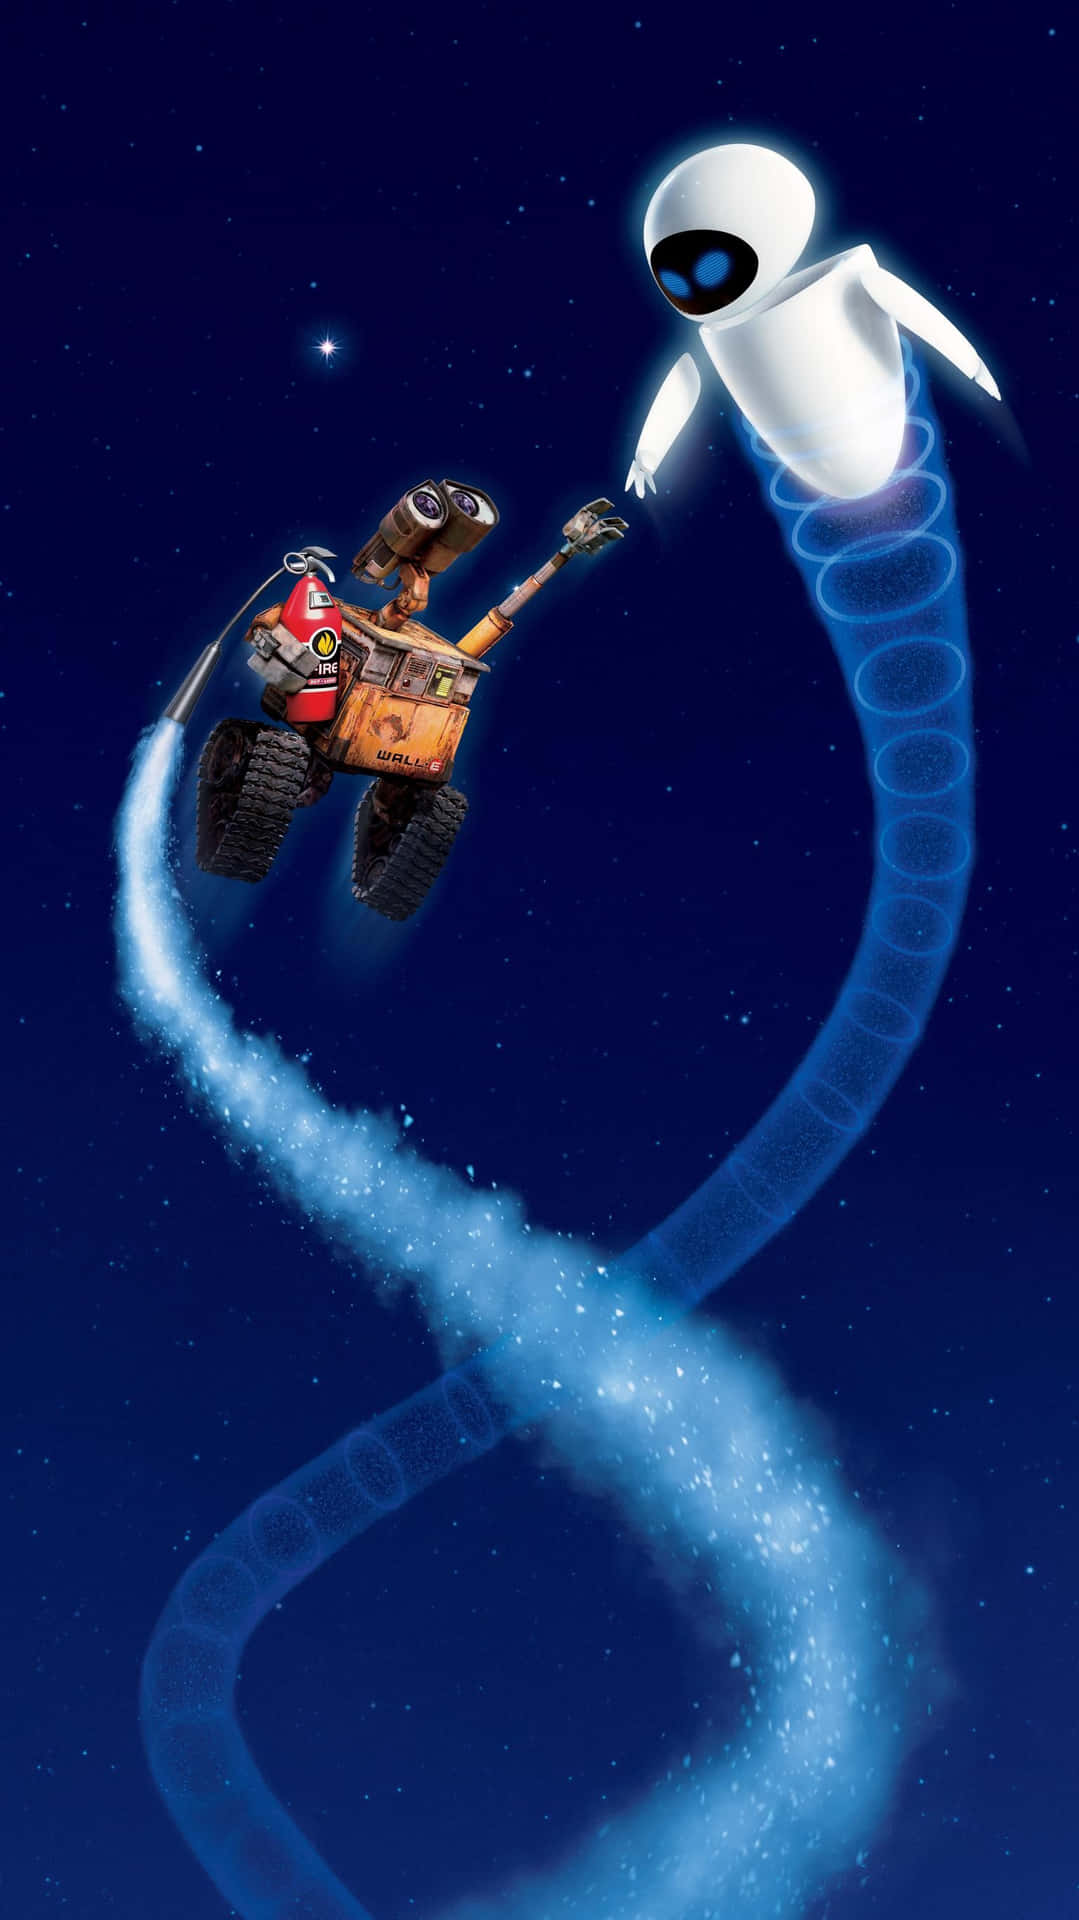 Flying Eve and Wall E Iphone Wallpaper